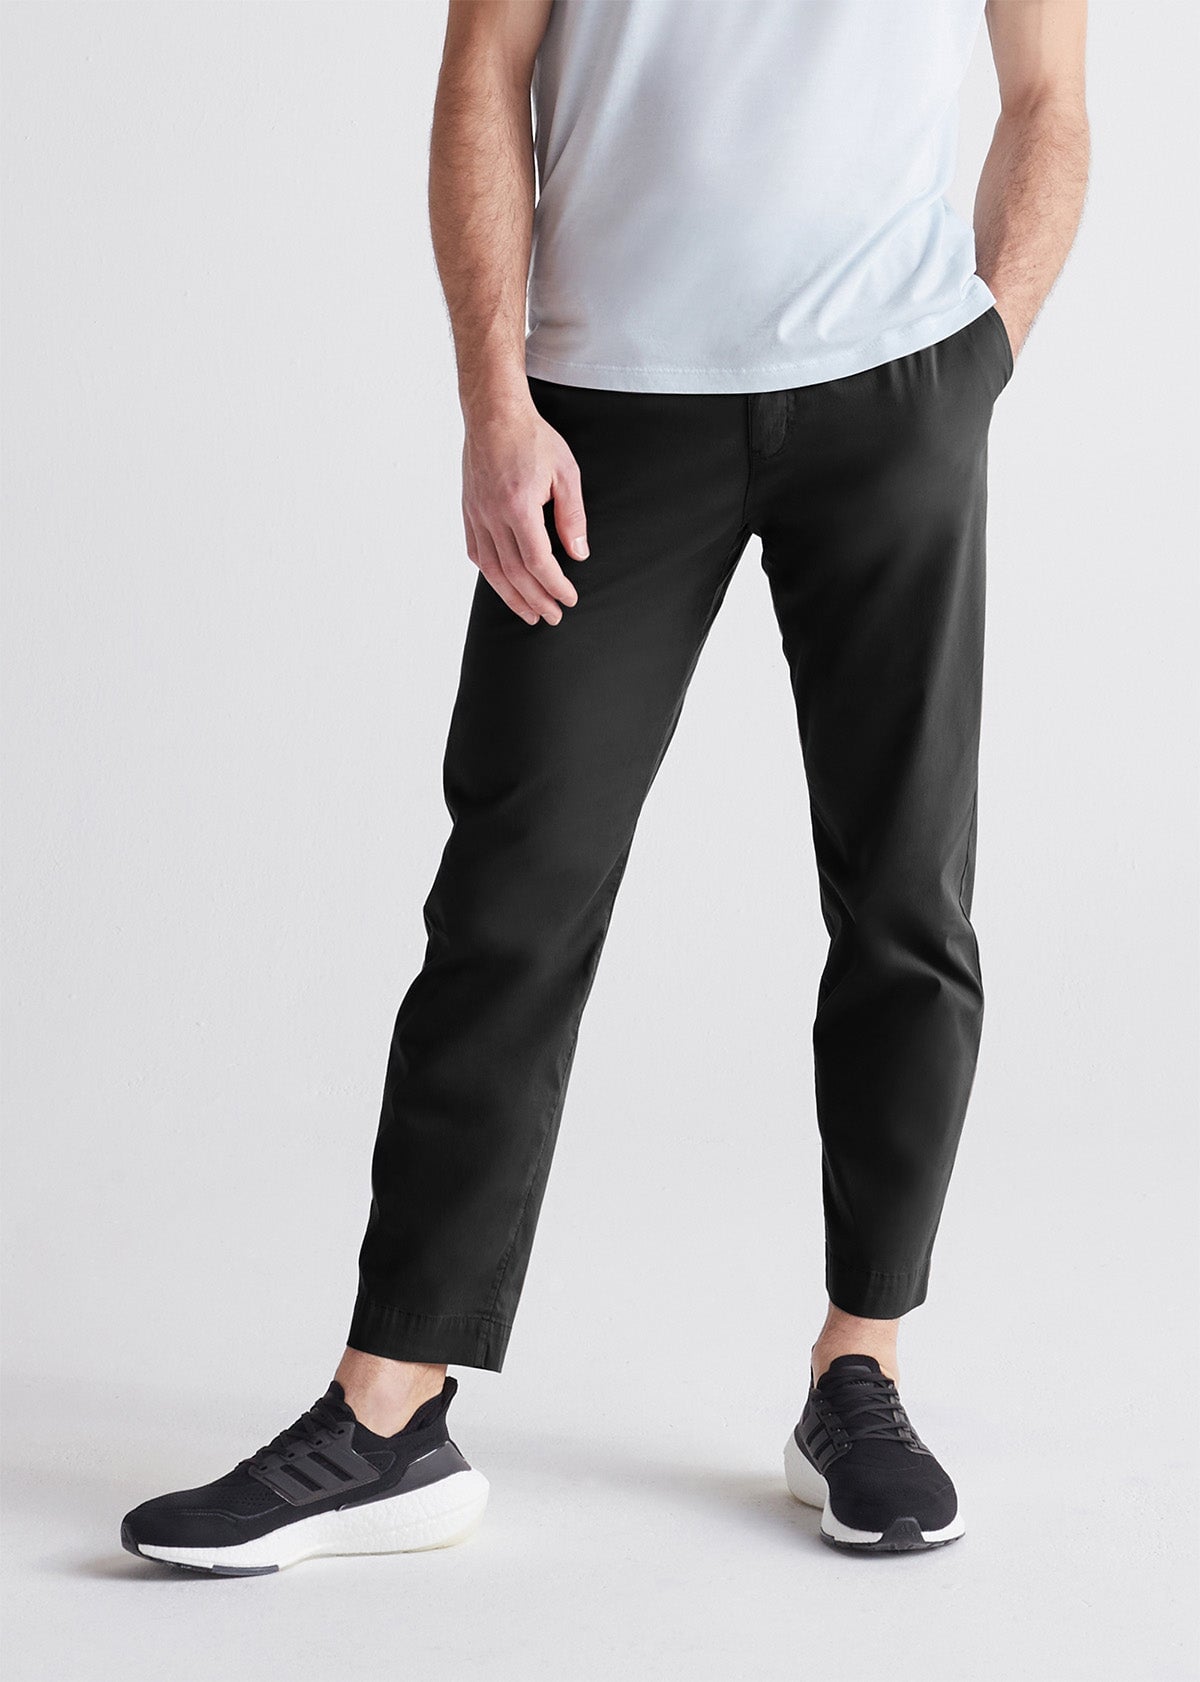 Lightweight Breathable Pants for Hot Weather